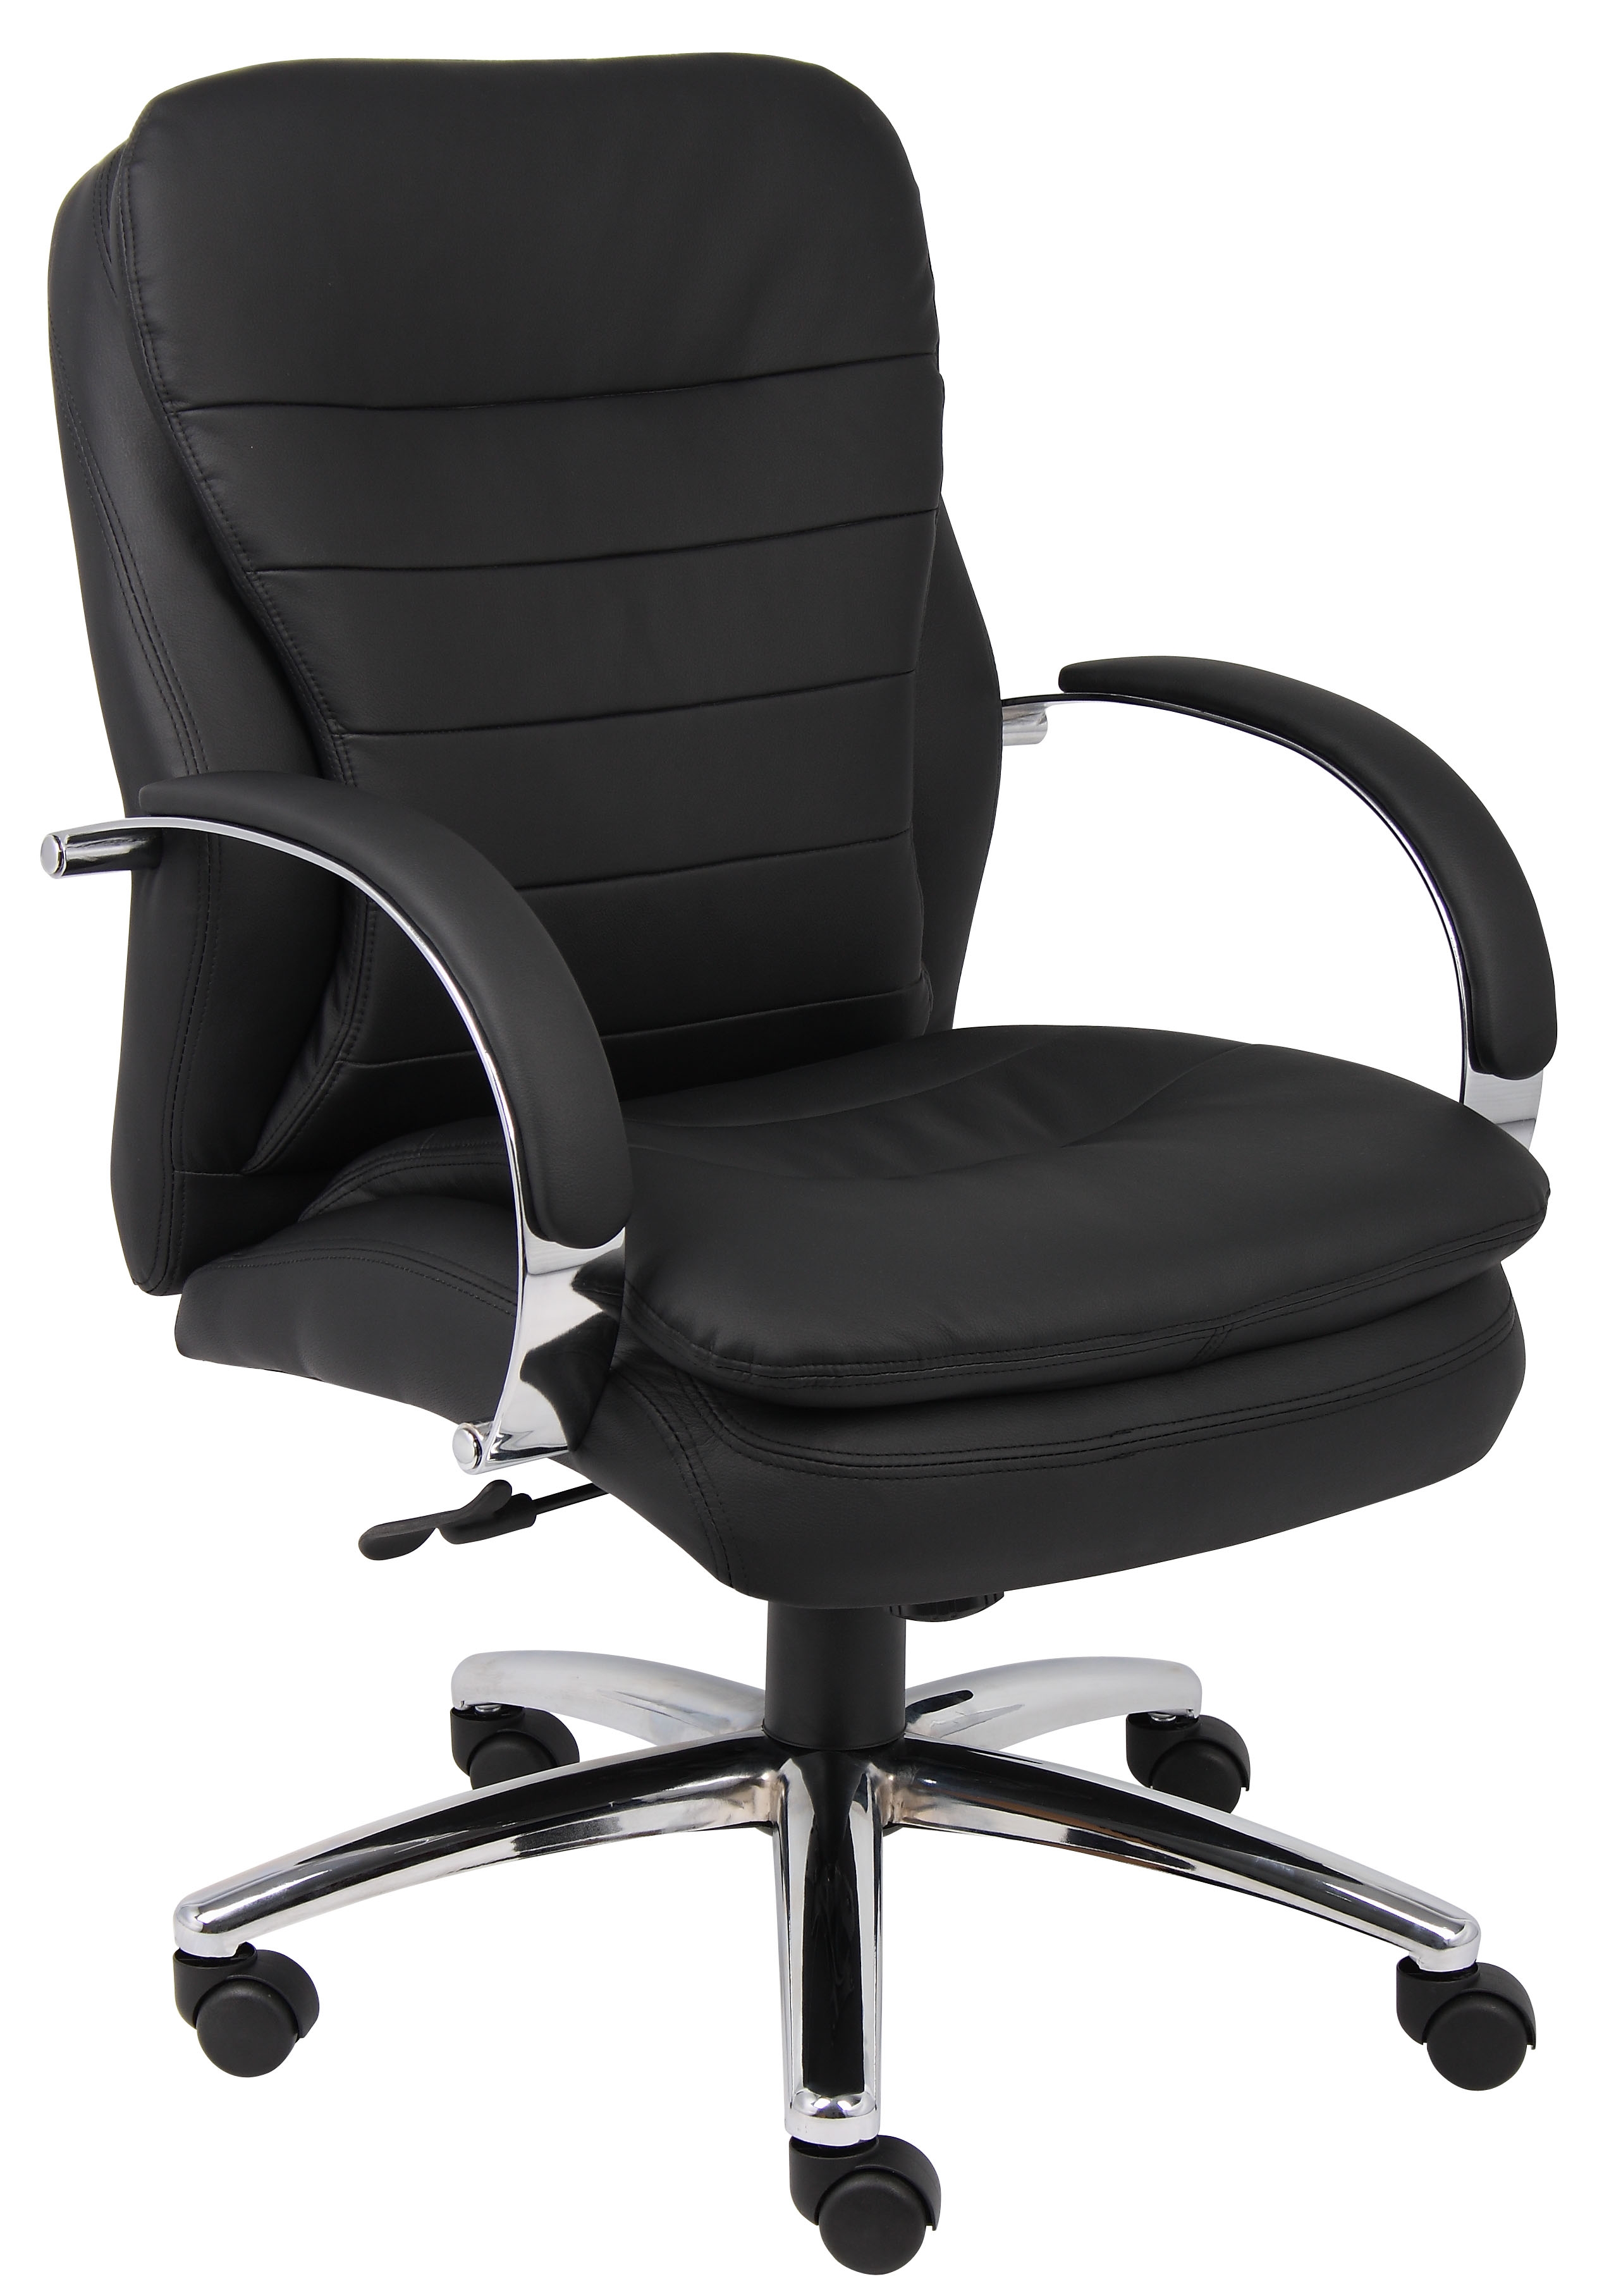 Boss Mid Back Caressoftplus Exec. Chair W/ Chrome Base - image 1 of 5